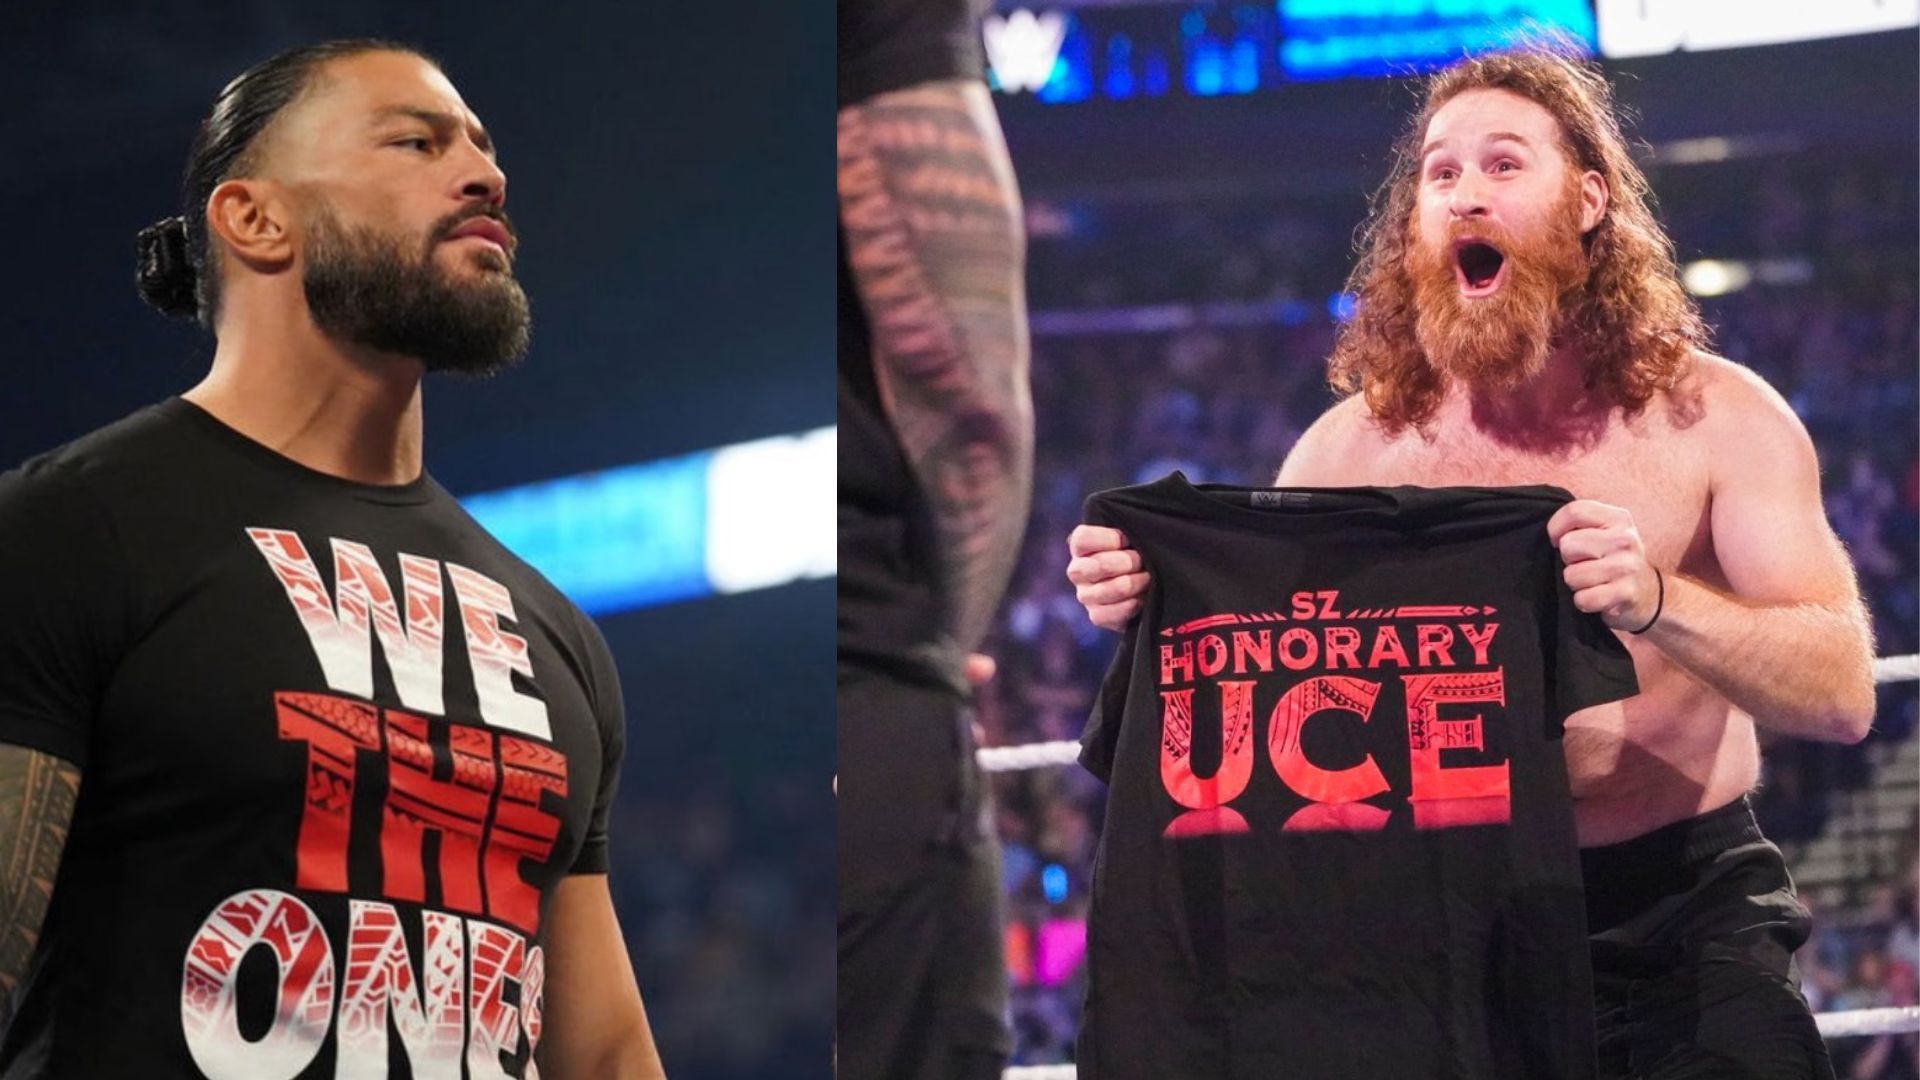 Sami Zayn is a verified member of the Uces on SmackDown